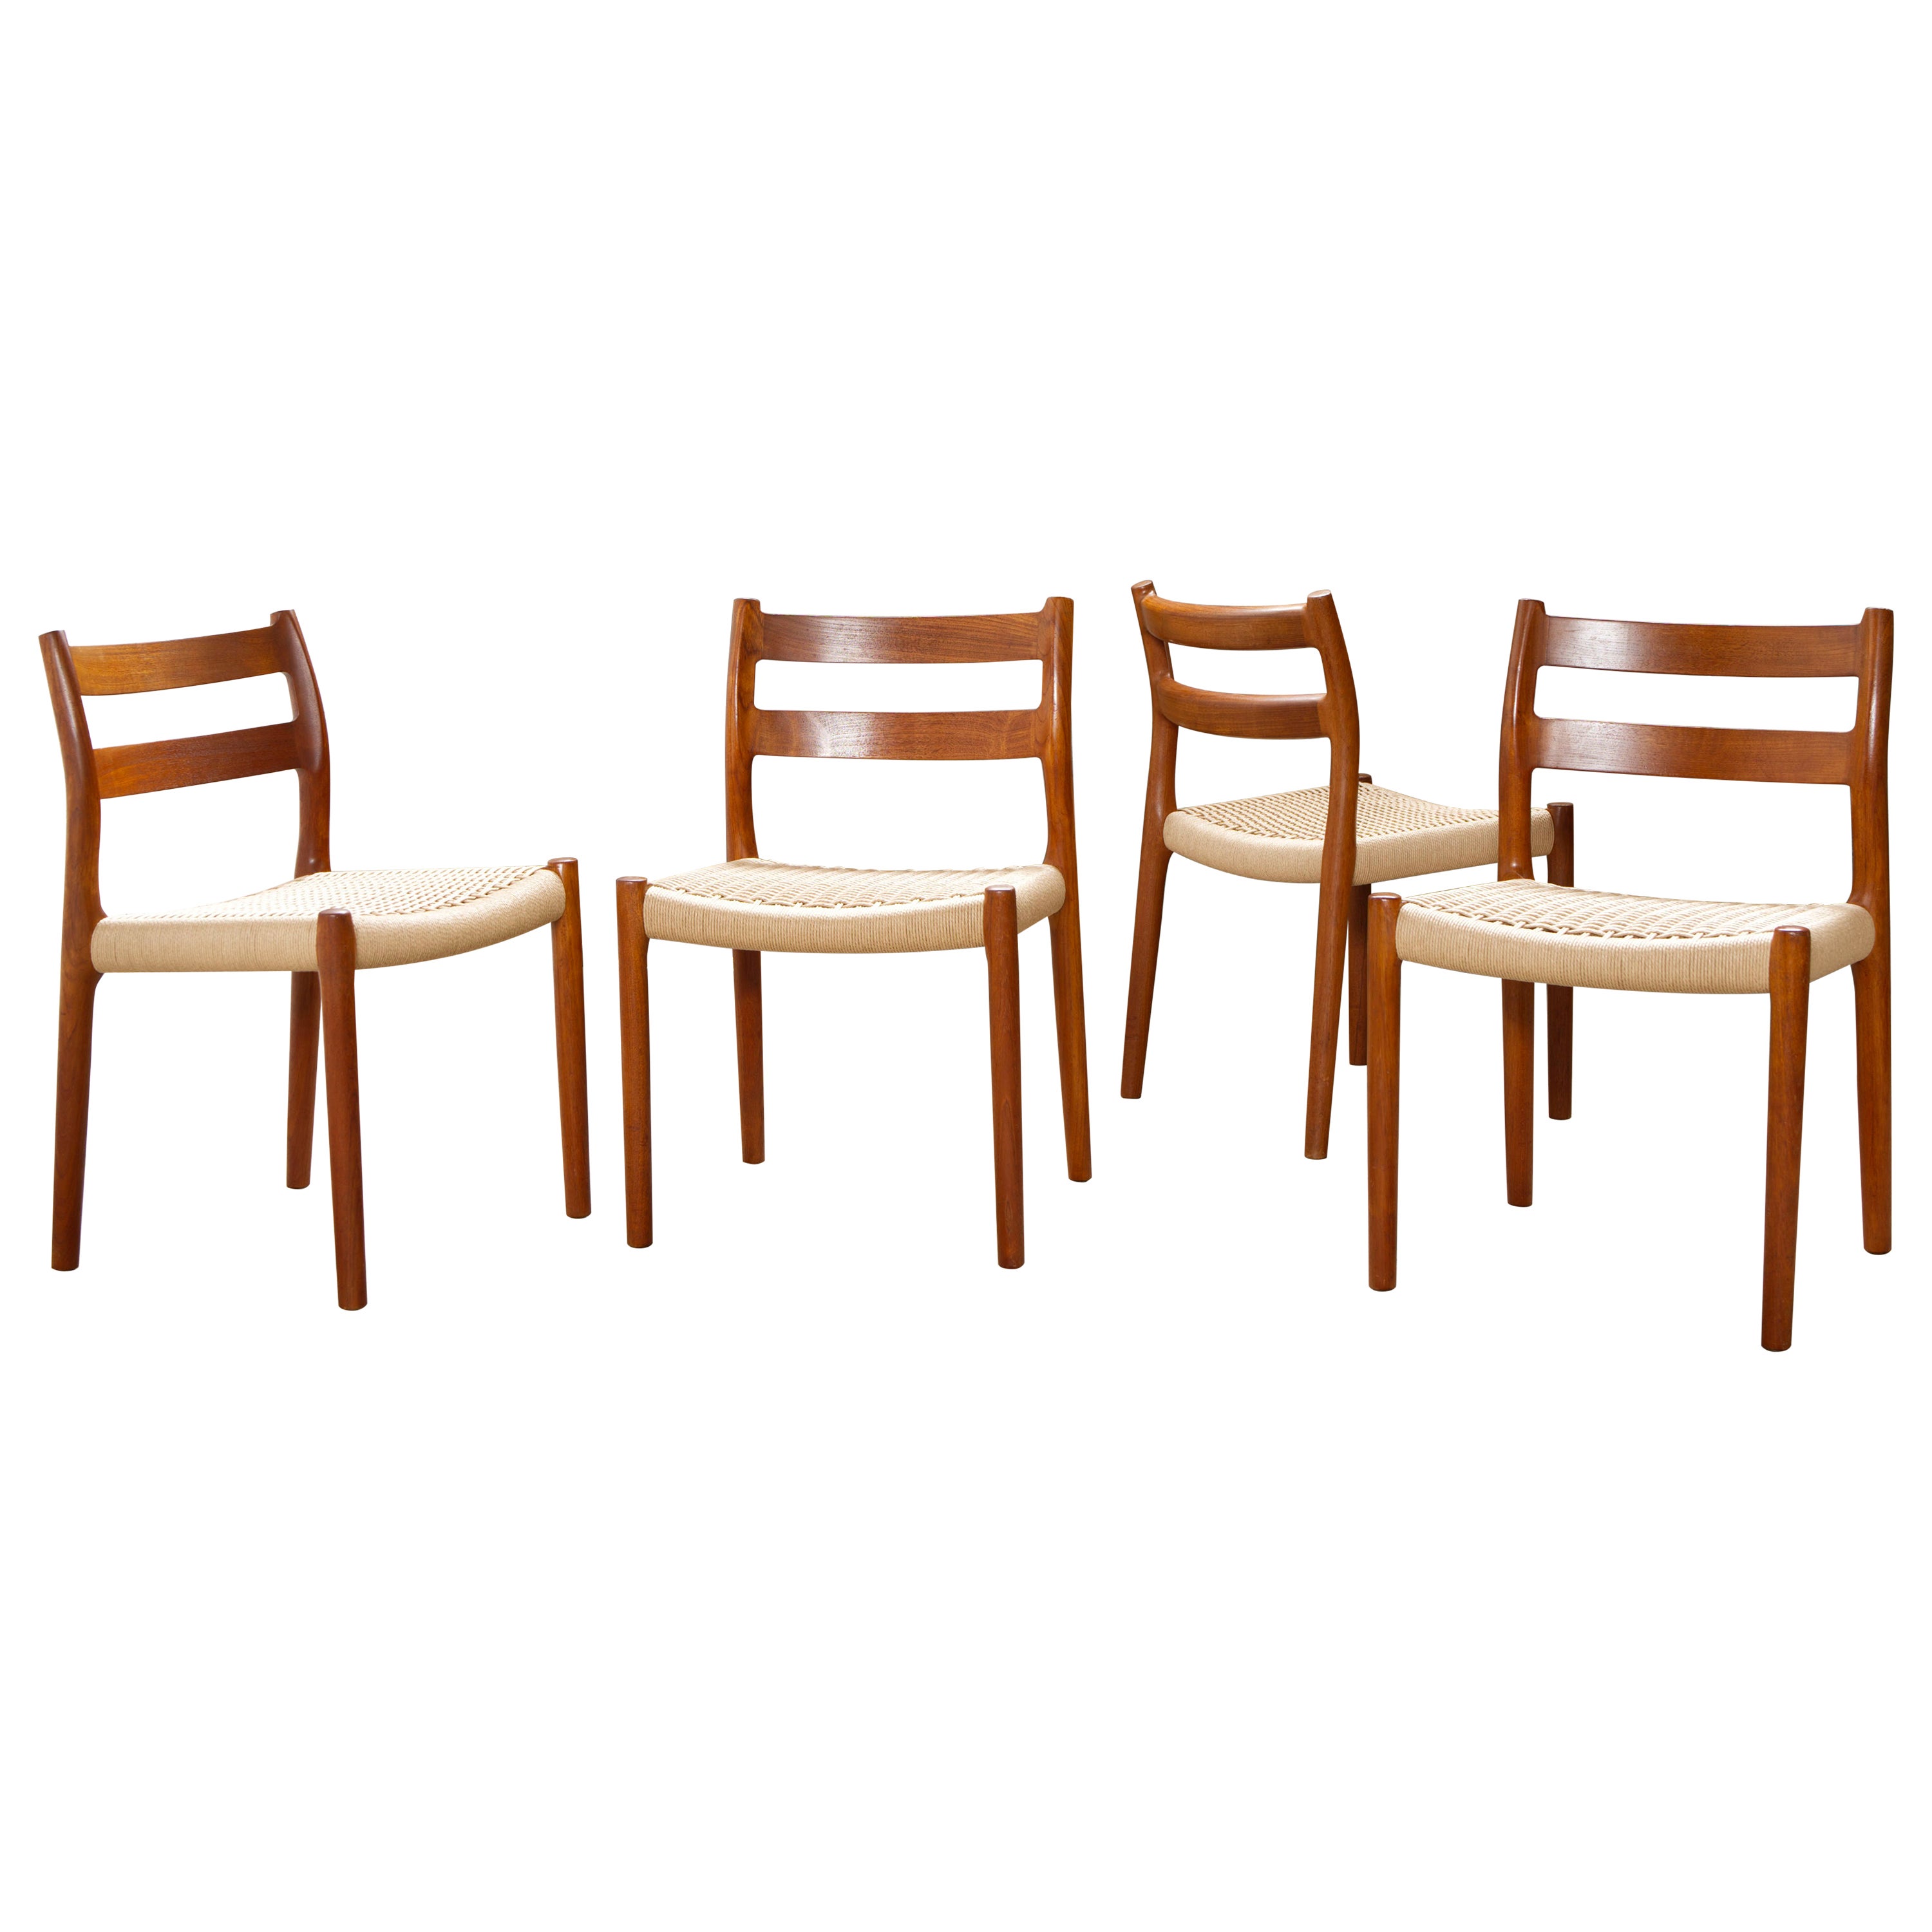 Set of 4 'Model 84' Teak & Papercord Dining Chairs by Niels Otto Møller. For Sale